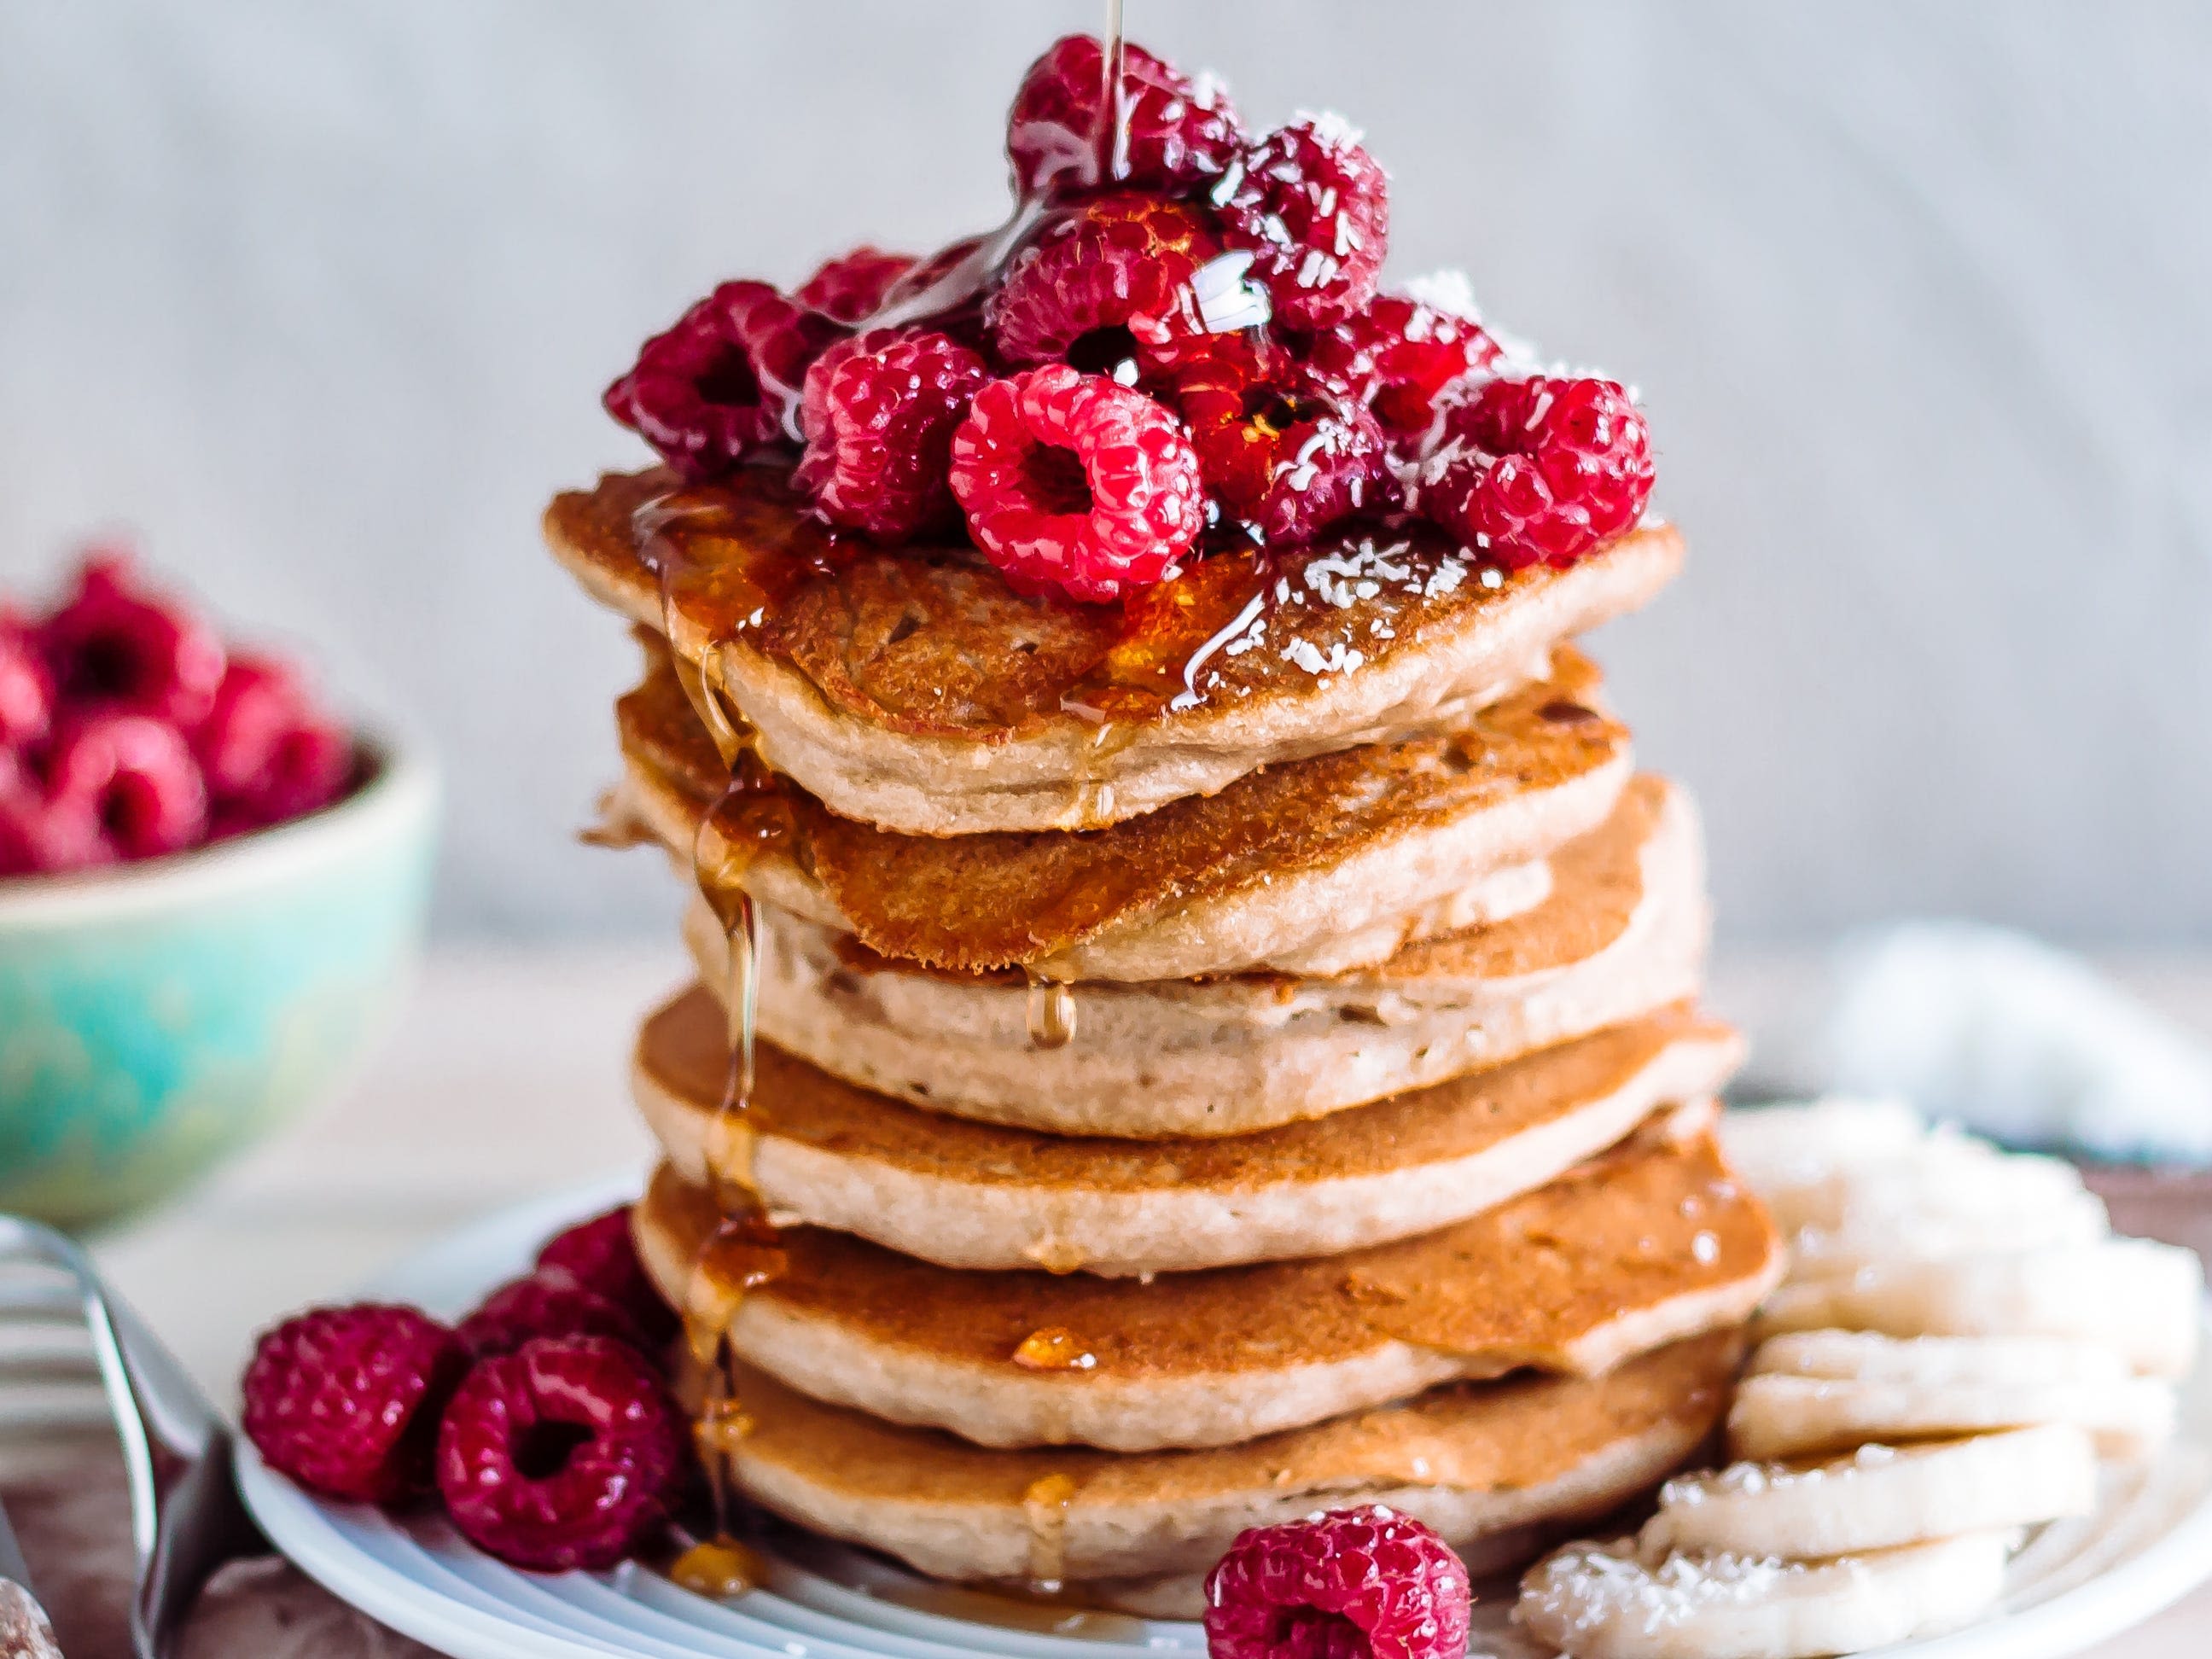 A man who reversed his type 2 diabetes shares his high-fiber, high-protein pancake recipe